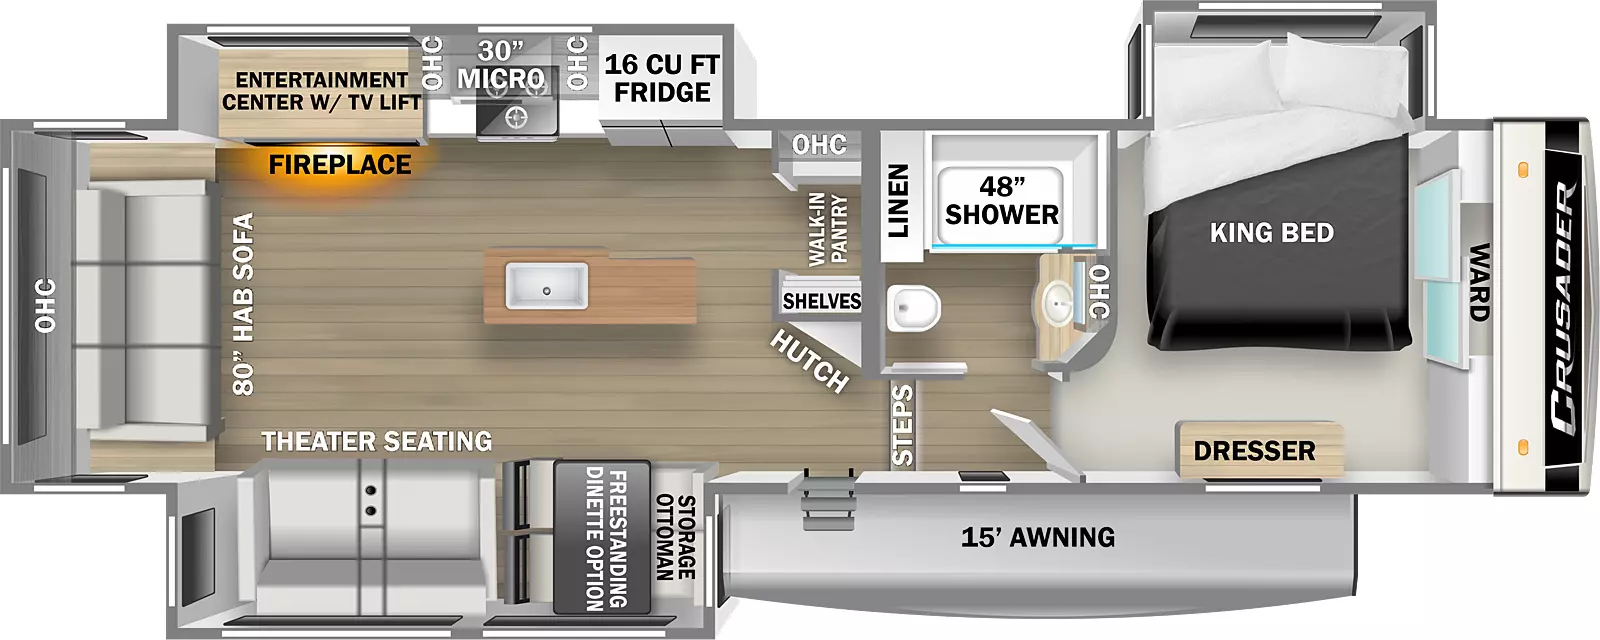 The Crusader 335RLP has a single entry door, 15' awning, and three slideouts, one on the door side and two on the off-door side. The front of the unit is a slideout bedroom with king bed, wardrobe, and dresser. The bedroom door leads to a hallway with two steps into the main living area. On the right side of the hallway is the bathroom with 48" shower, sink and medicine cabinet, linen closet, and commode. Standing at the base of the steps, there is a hutch to your right with shelves, a walk-in pantry, and overhead cabinets. There is a kitchen island with butcher block countertop and sink near the middle of the room. On the right is a slideout containing the kitchen and entertainment center with fireplace. The kitchen contains a 12 cubic foot refrigerator, stovetop with oven, 30" overhead microwave, and overhead cabinets. The entertainment center/fireplace faces the opposite wall. An 80" hide-a-bed sofa with overhead cabinets mounted above. The left wall of the unit is another slide room containing theater seating, a booth dinette with the option for a free-standing dinette, and storage ottoman.